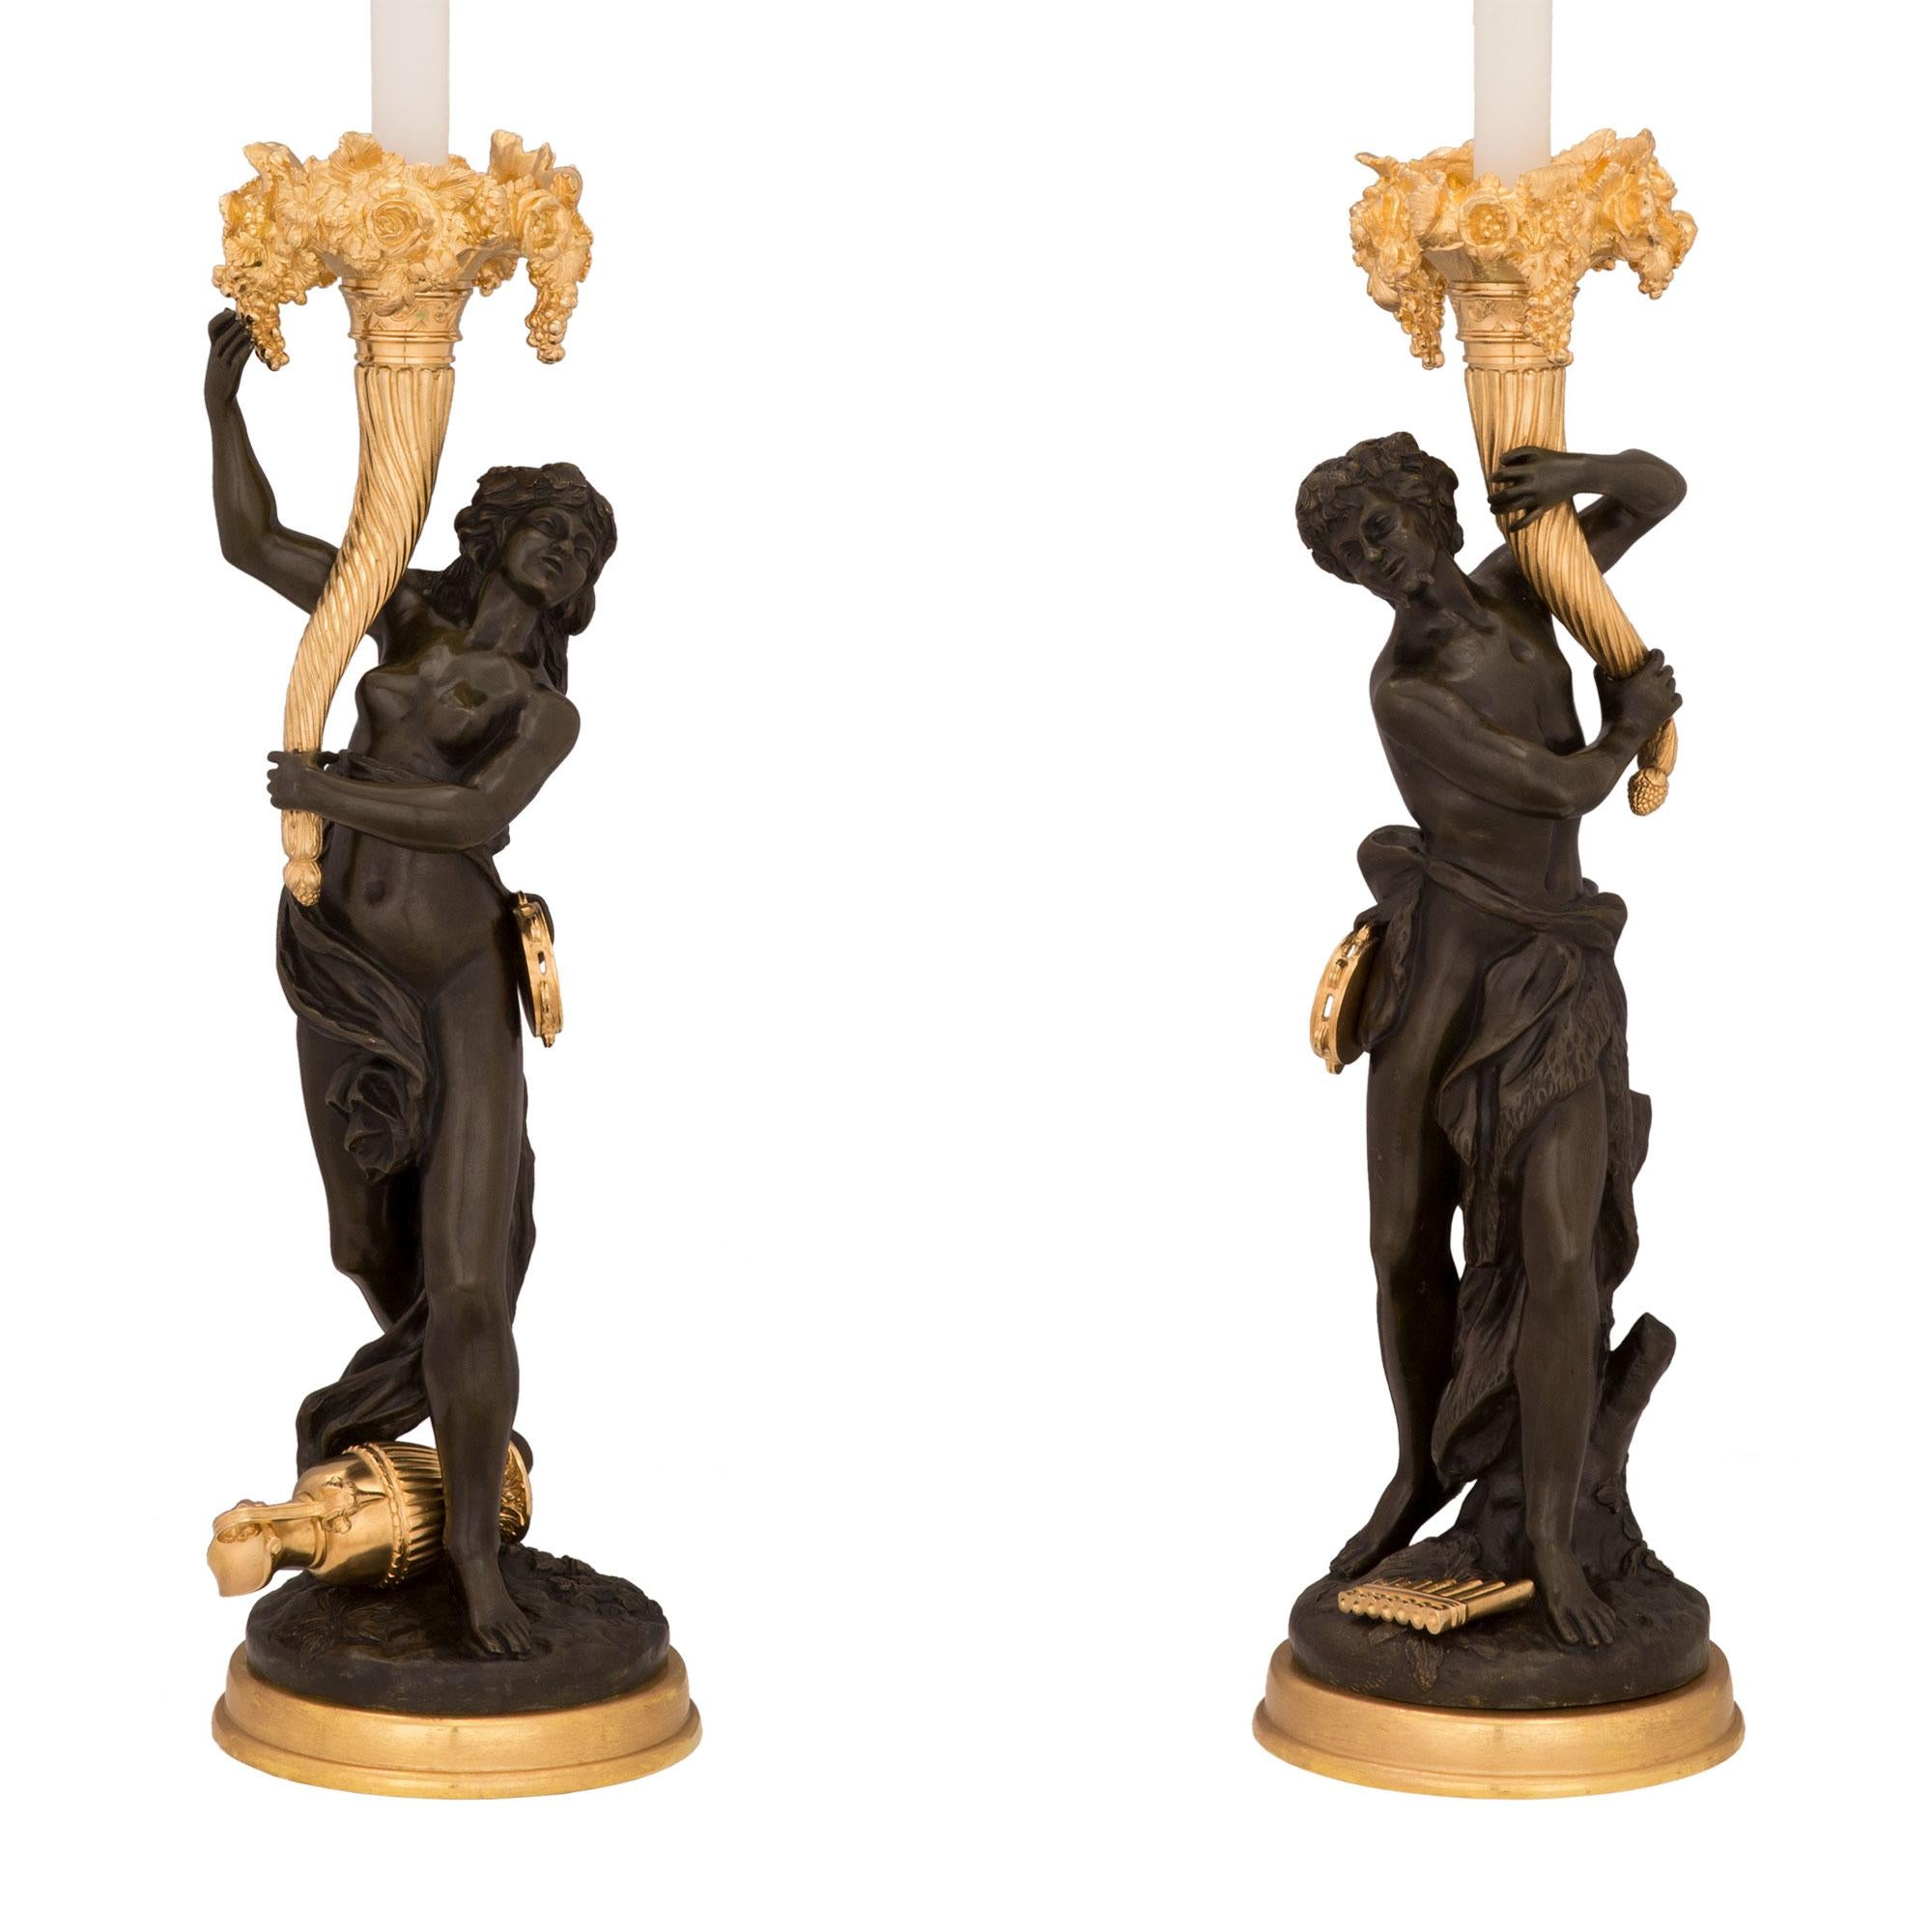 A beautiful pair of French 19th century Louis XVI st. ormolu and patinated bronze lamps, signed Clodion. Each lamp is raised by a fine ormolu base with a wonderfully executed ground like design. The left bronze is of a beautiful woman draped in